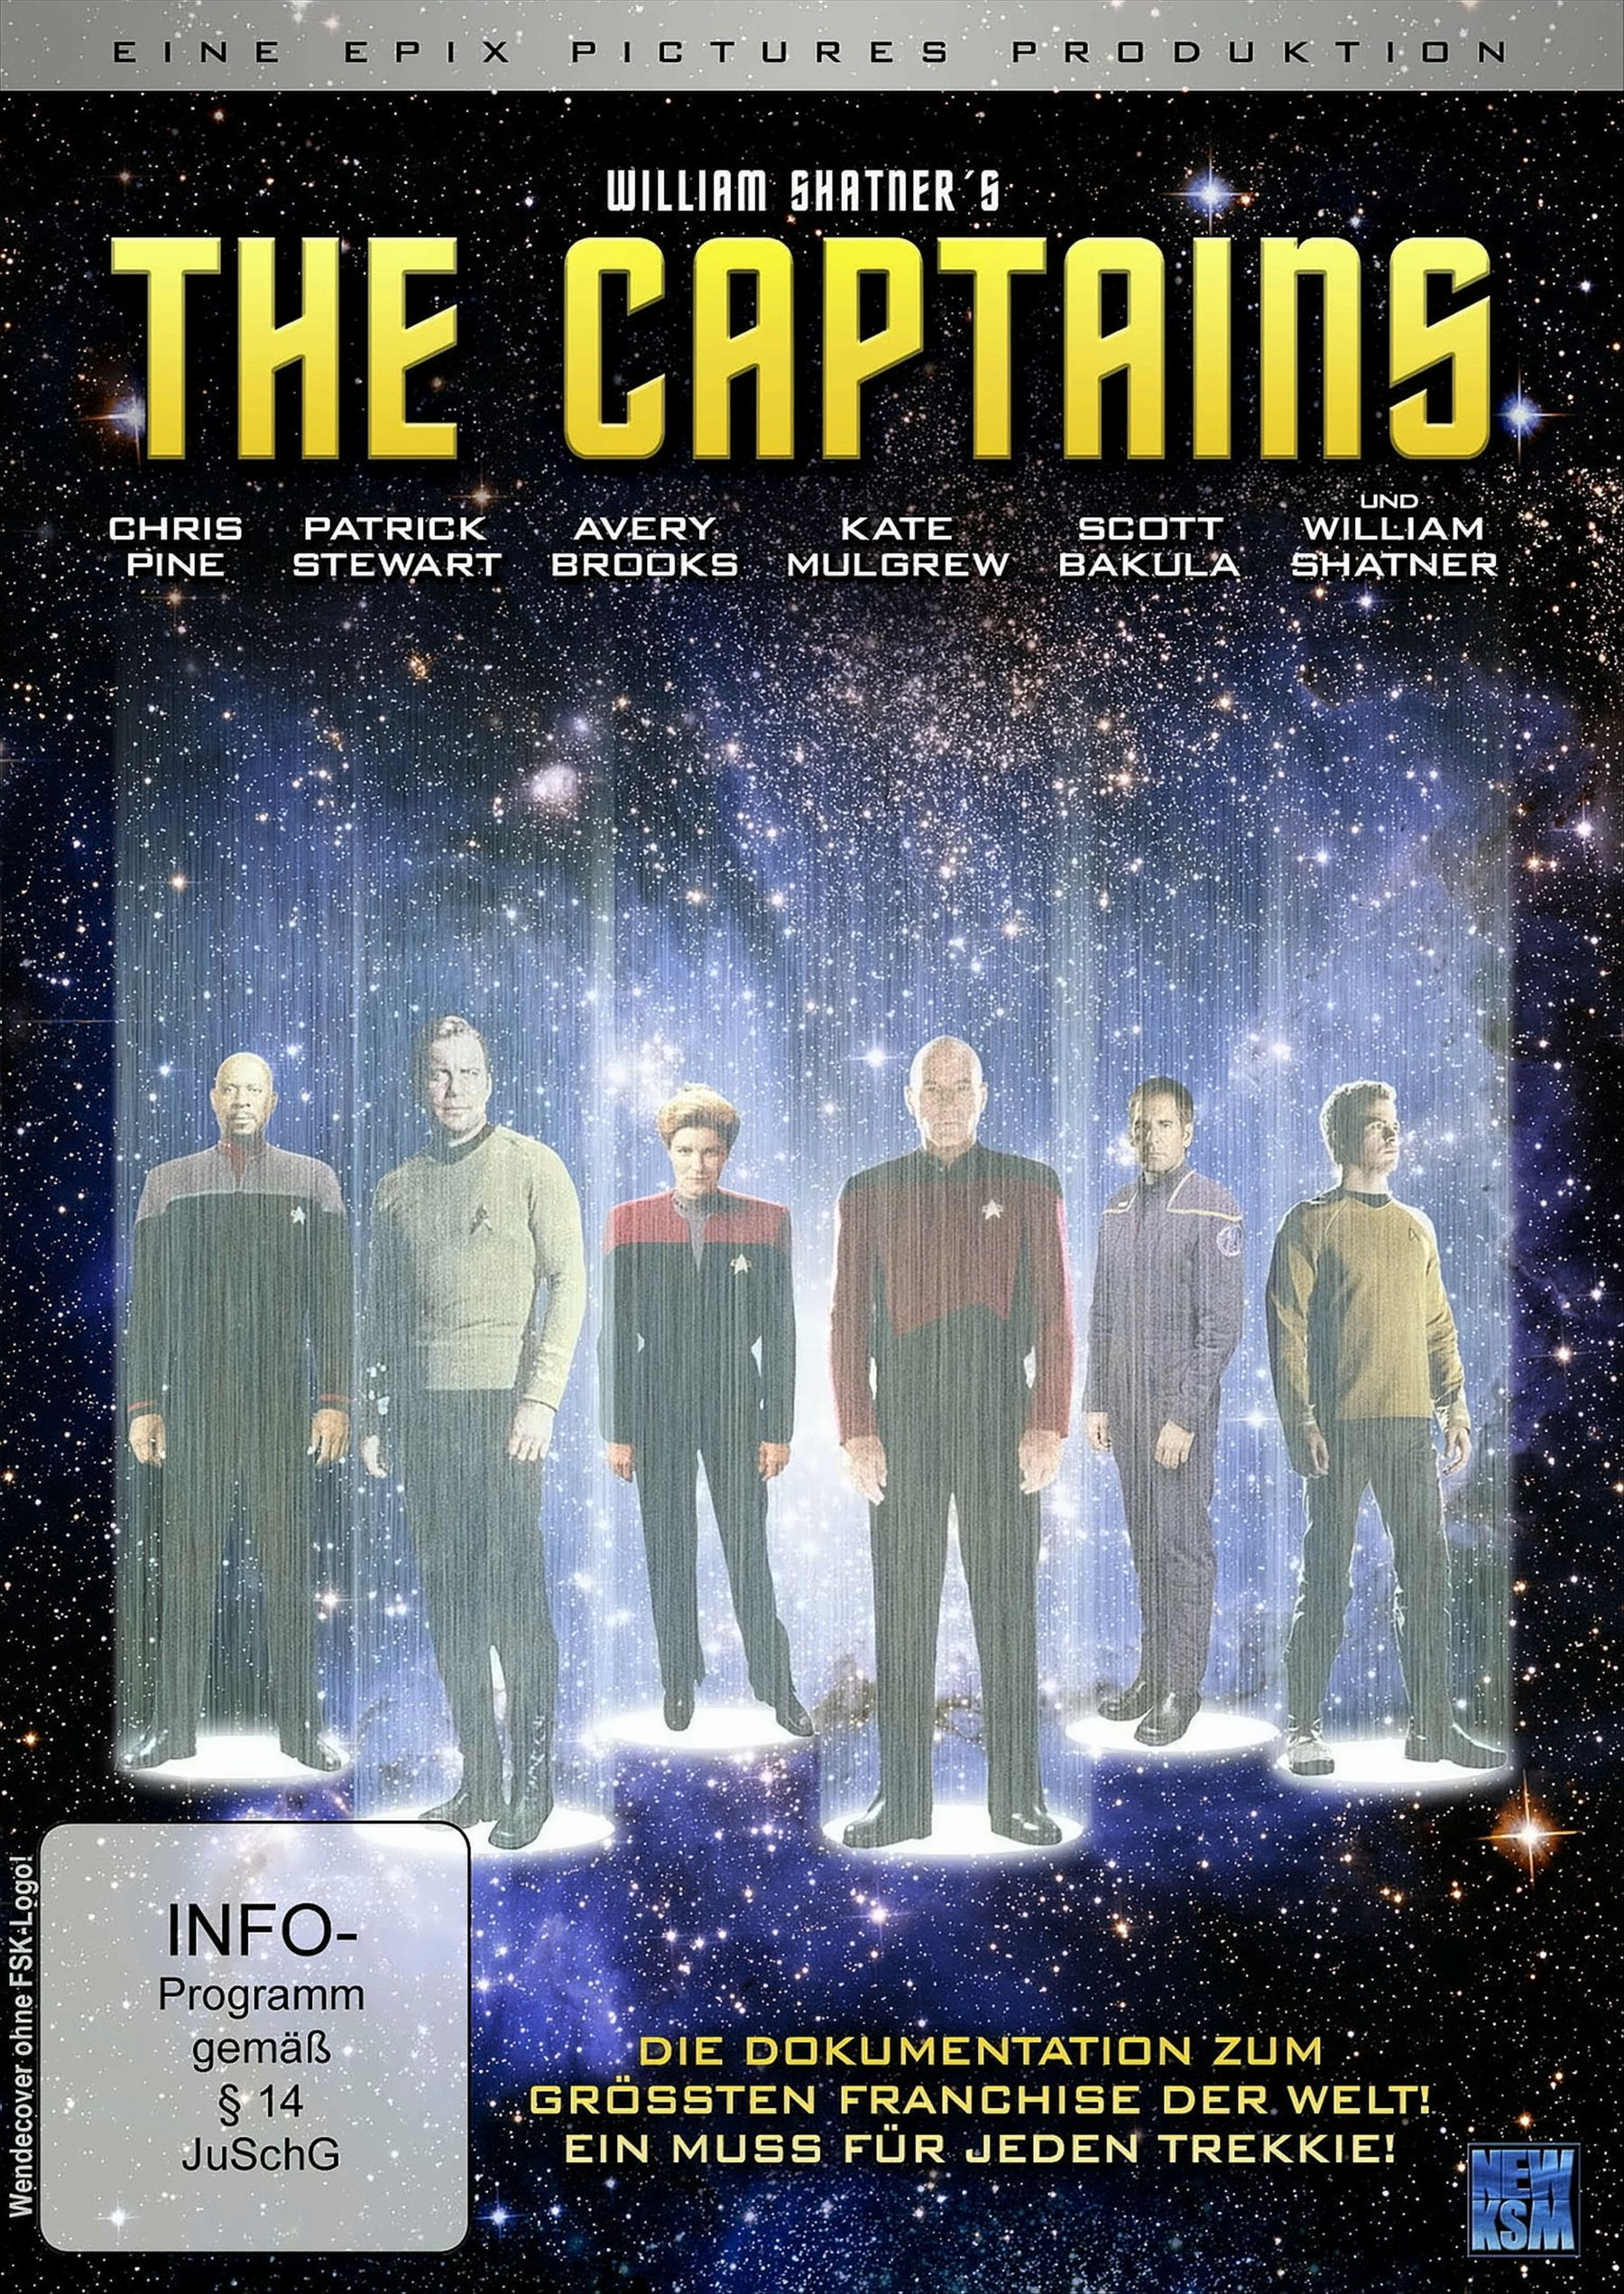 Captains The DVD